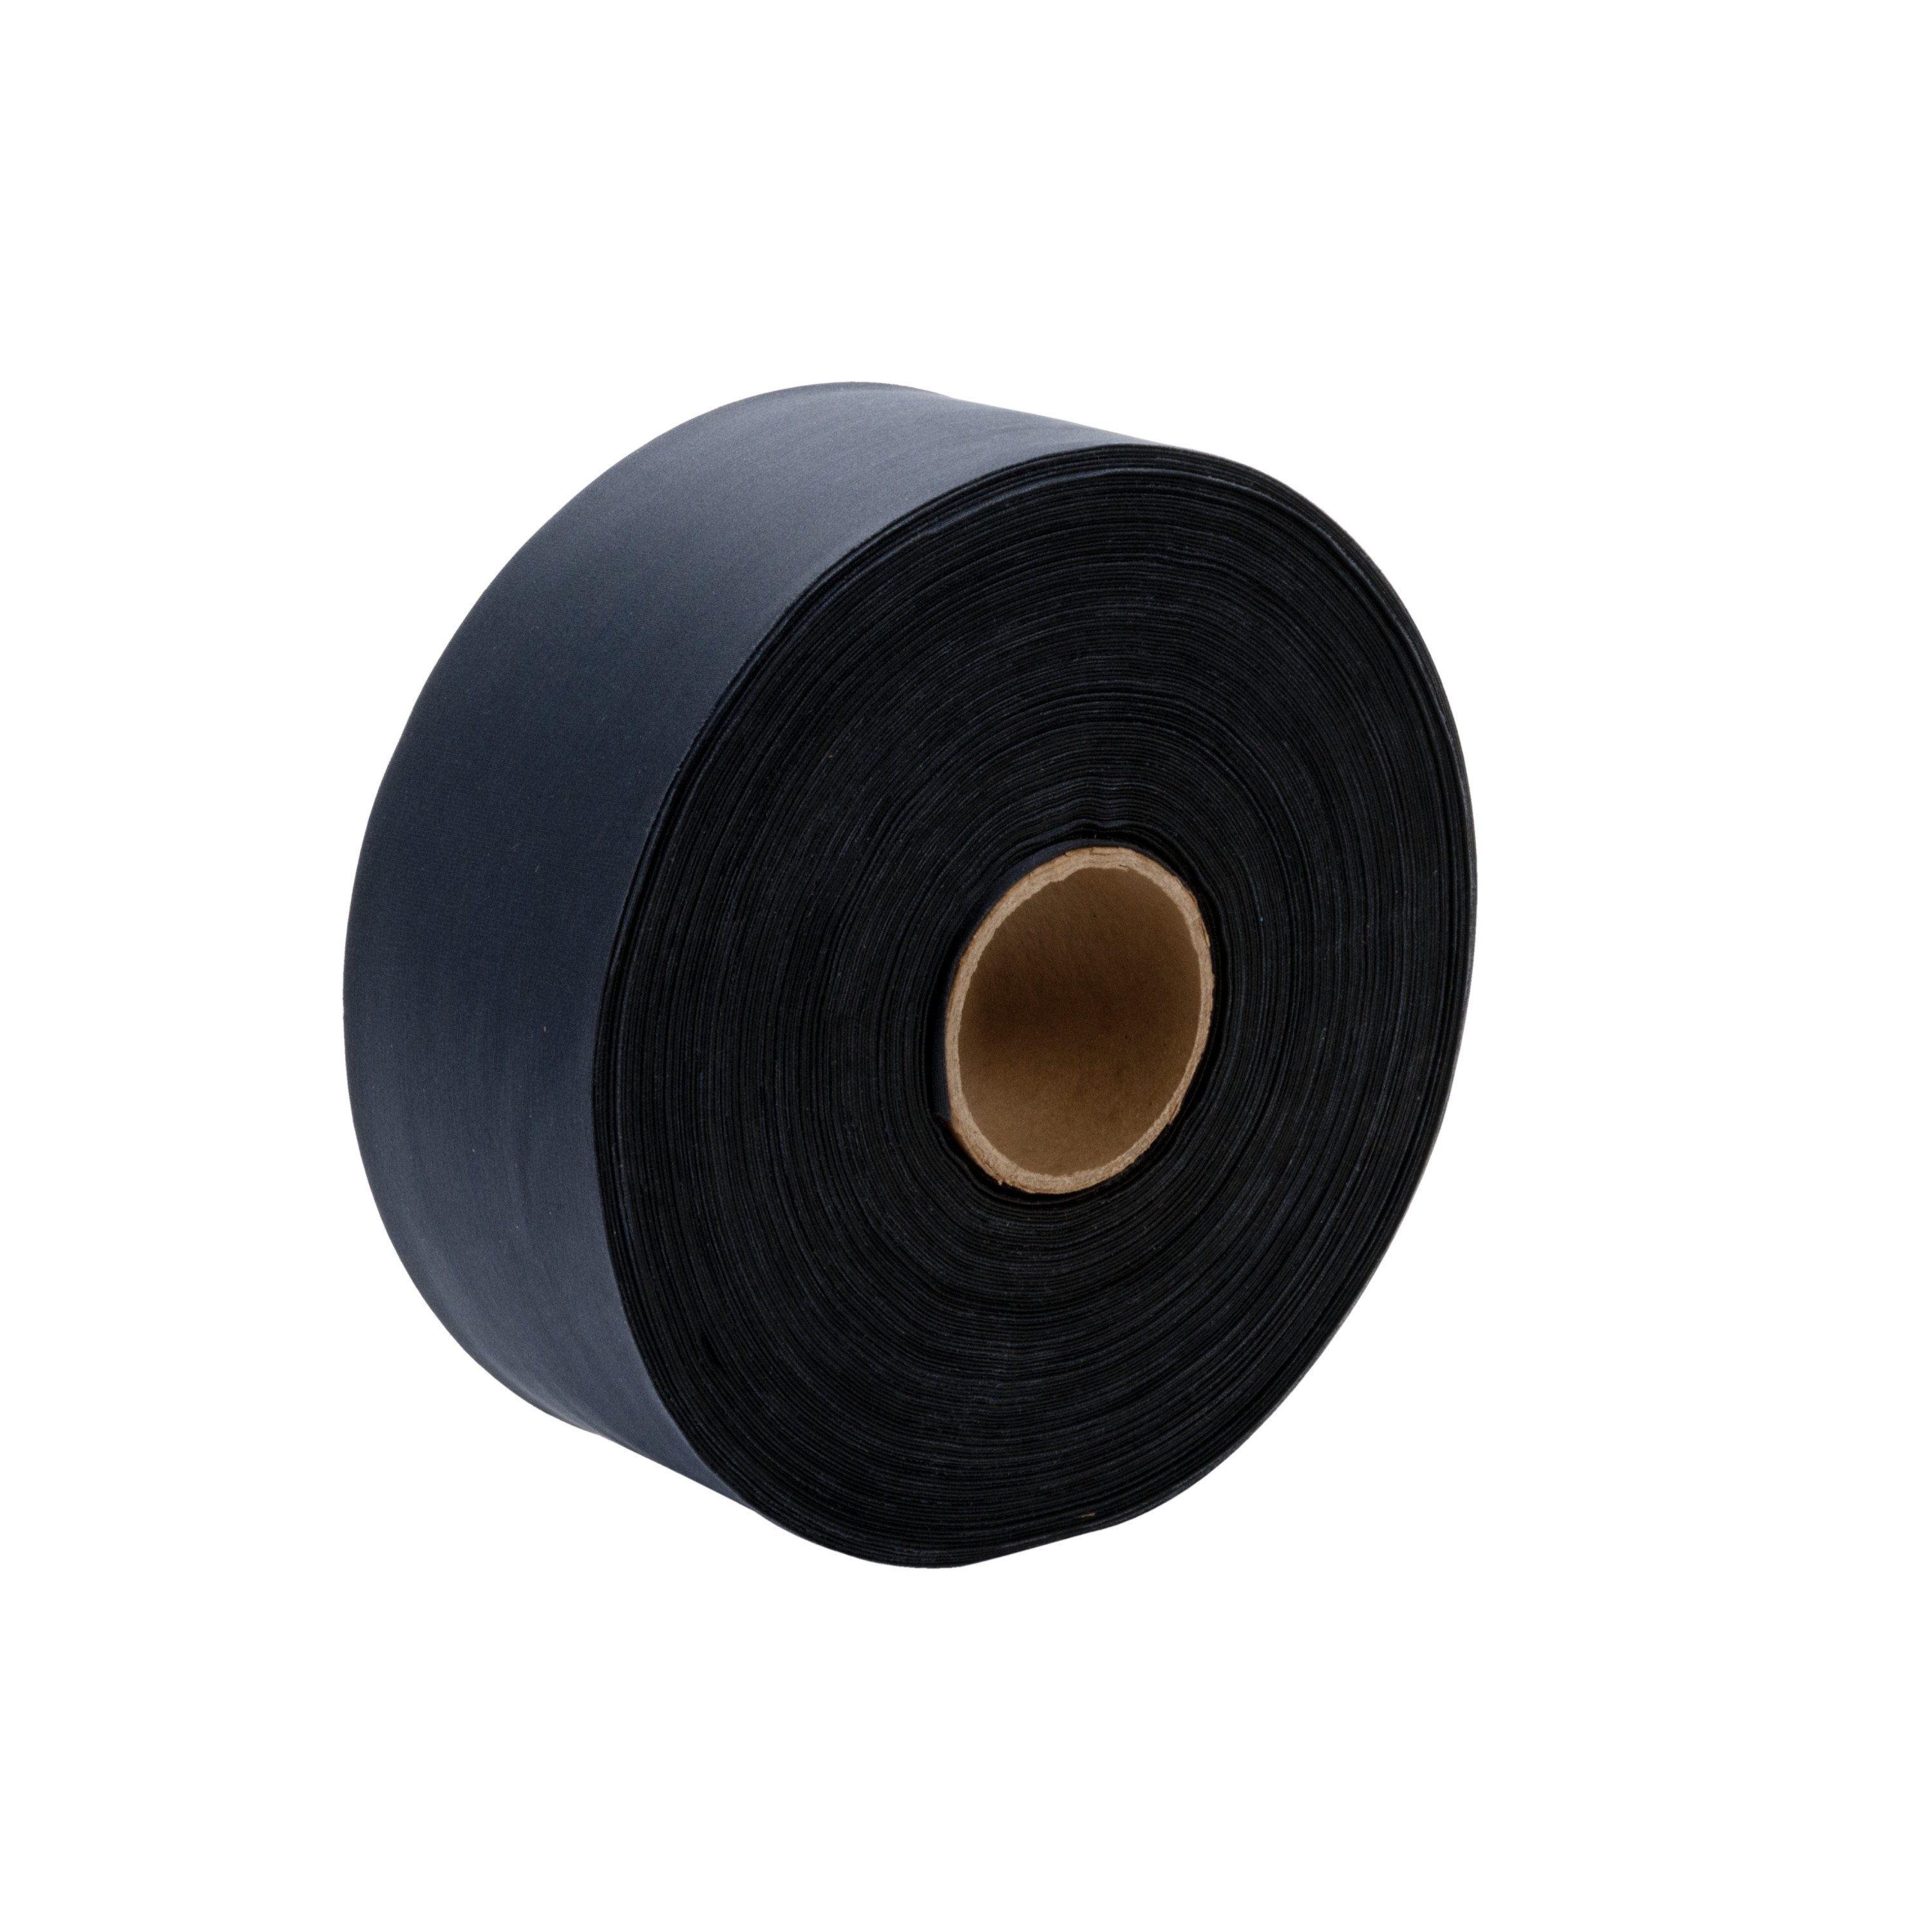 3M™ Gripping Material GM640, Black, 24 in x 72 yd, 1 roll per case